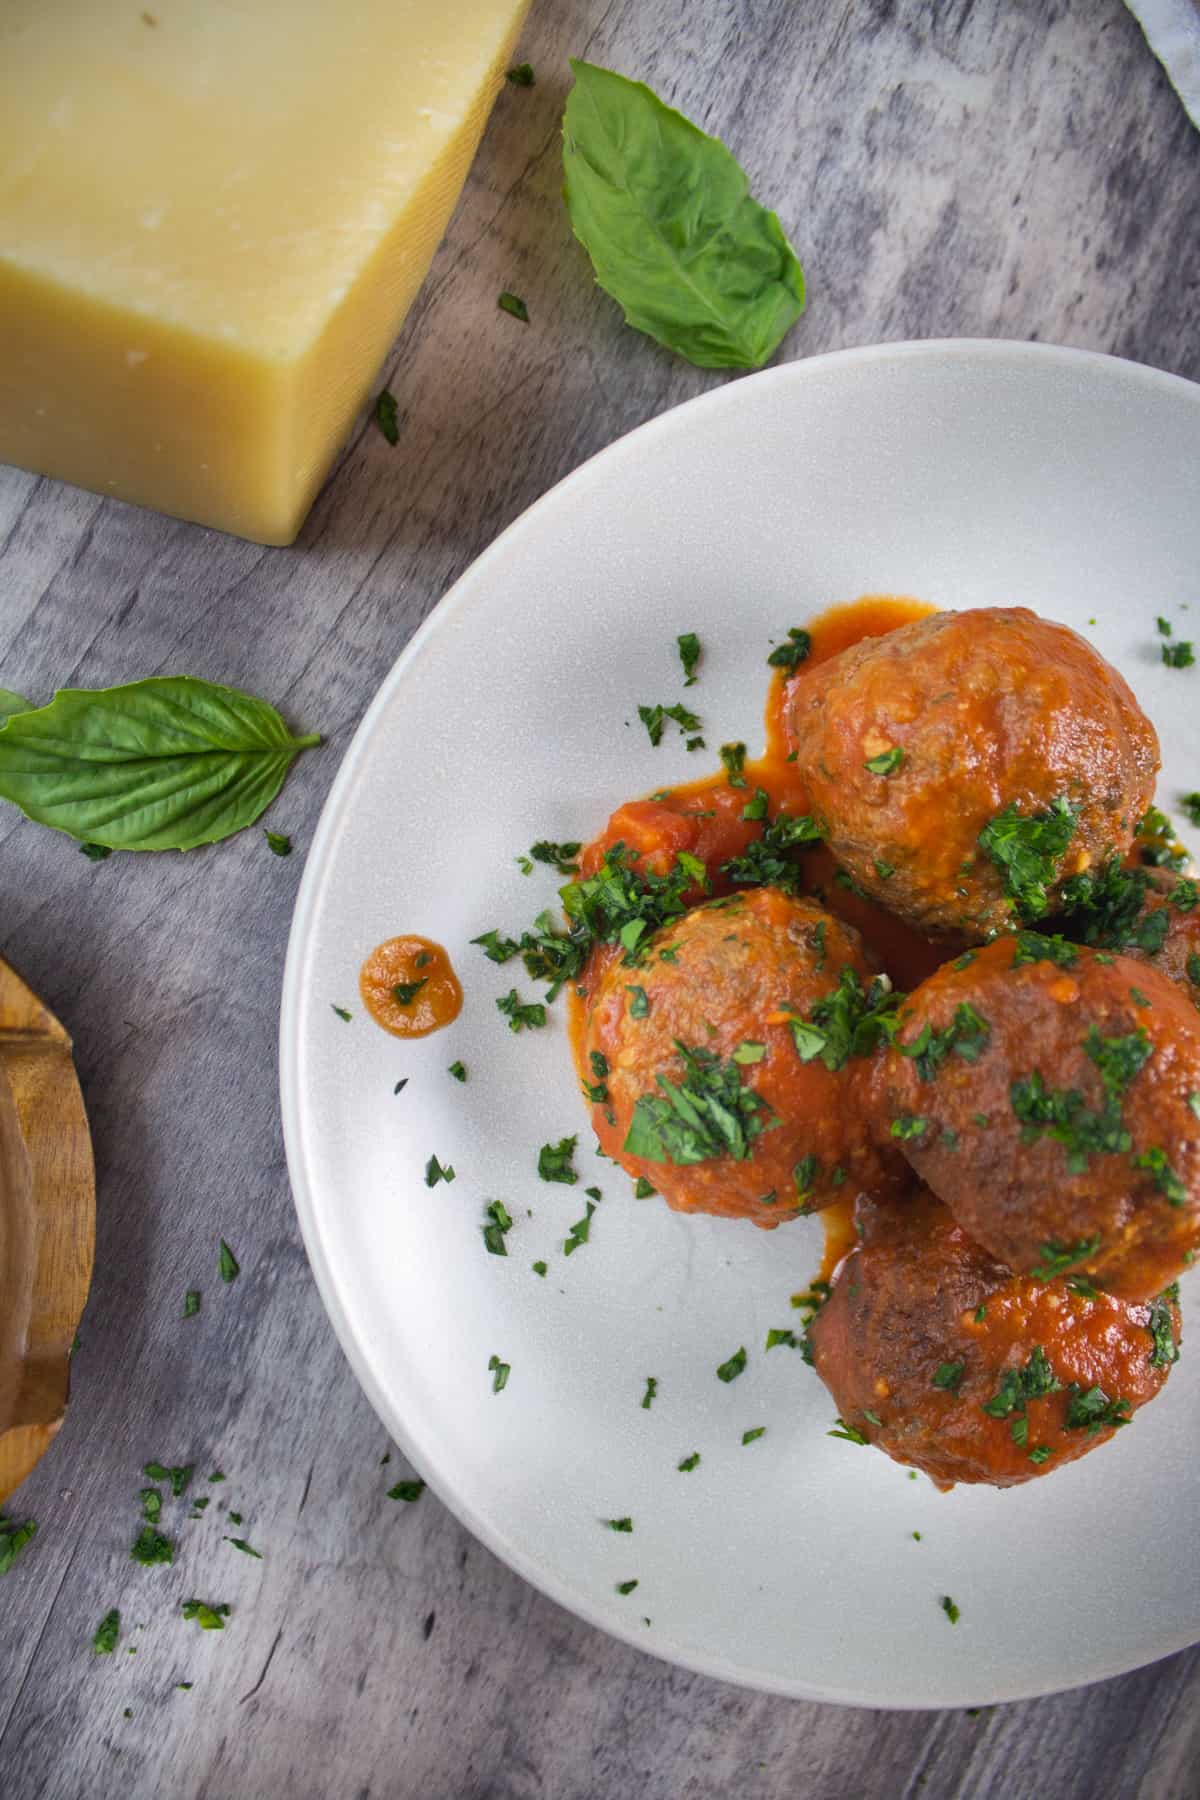 meatballs served with parmesan and fresh basil